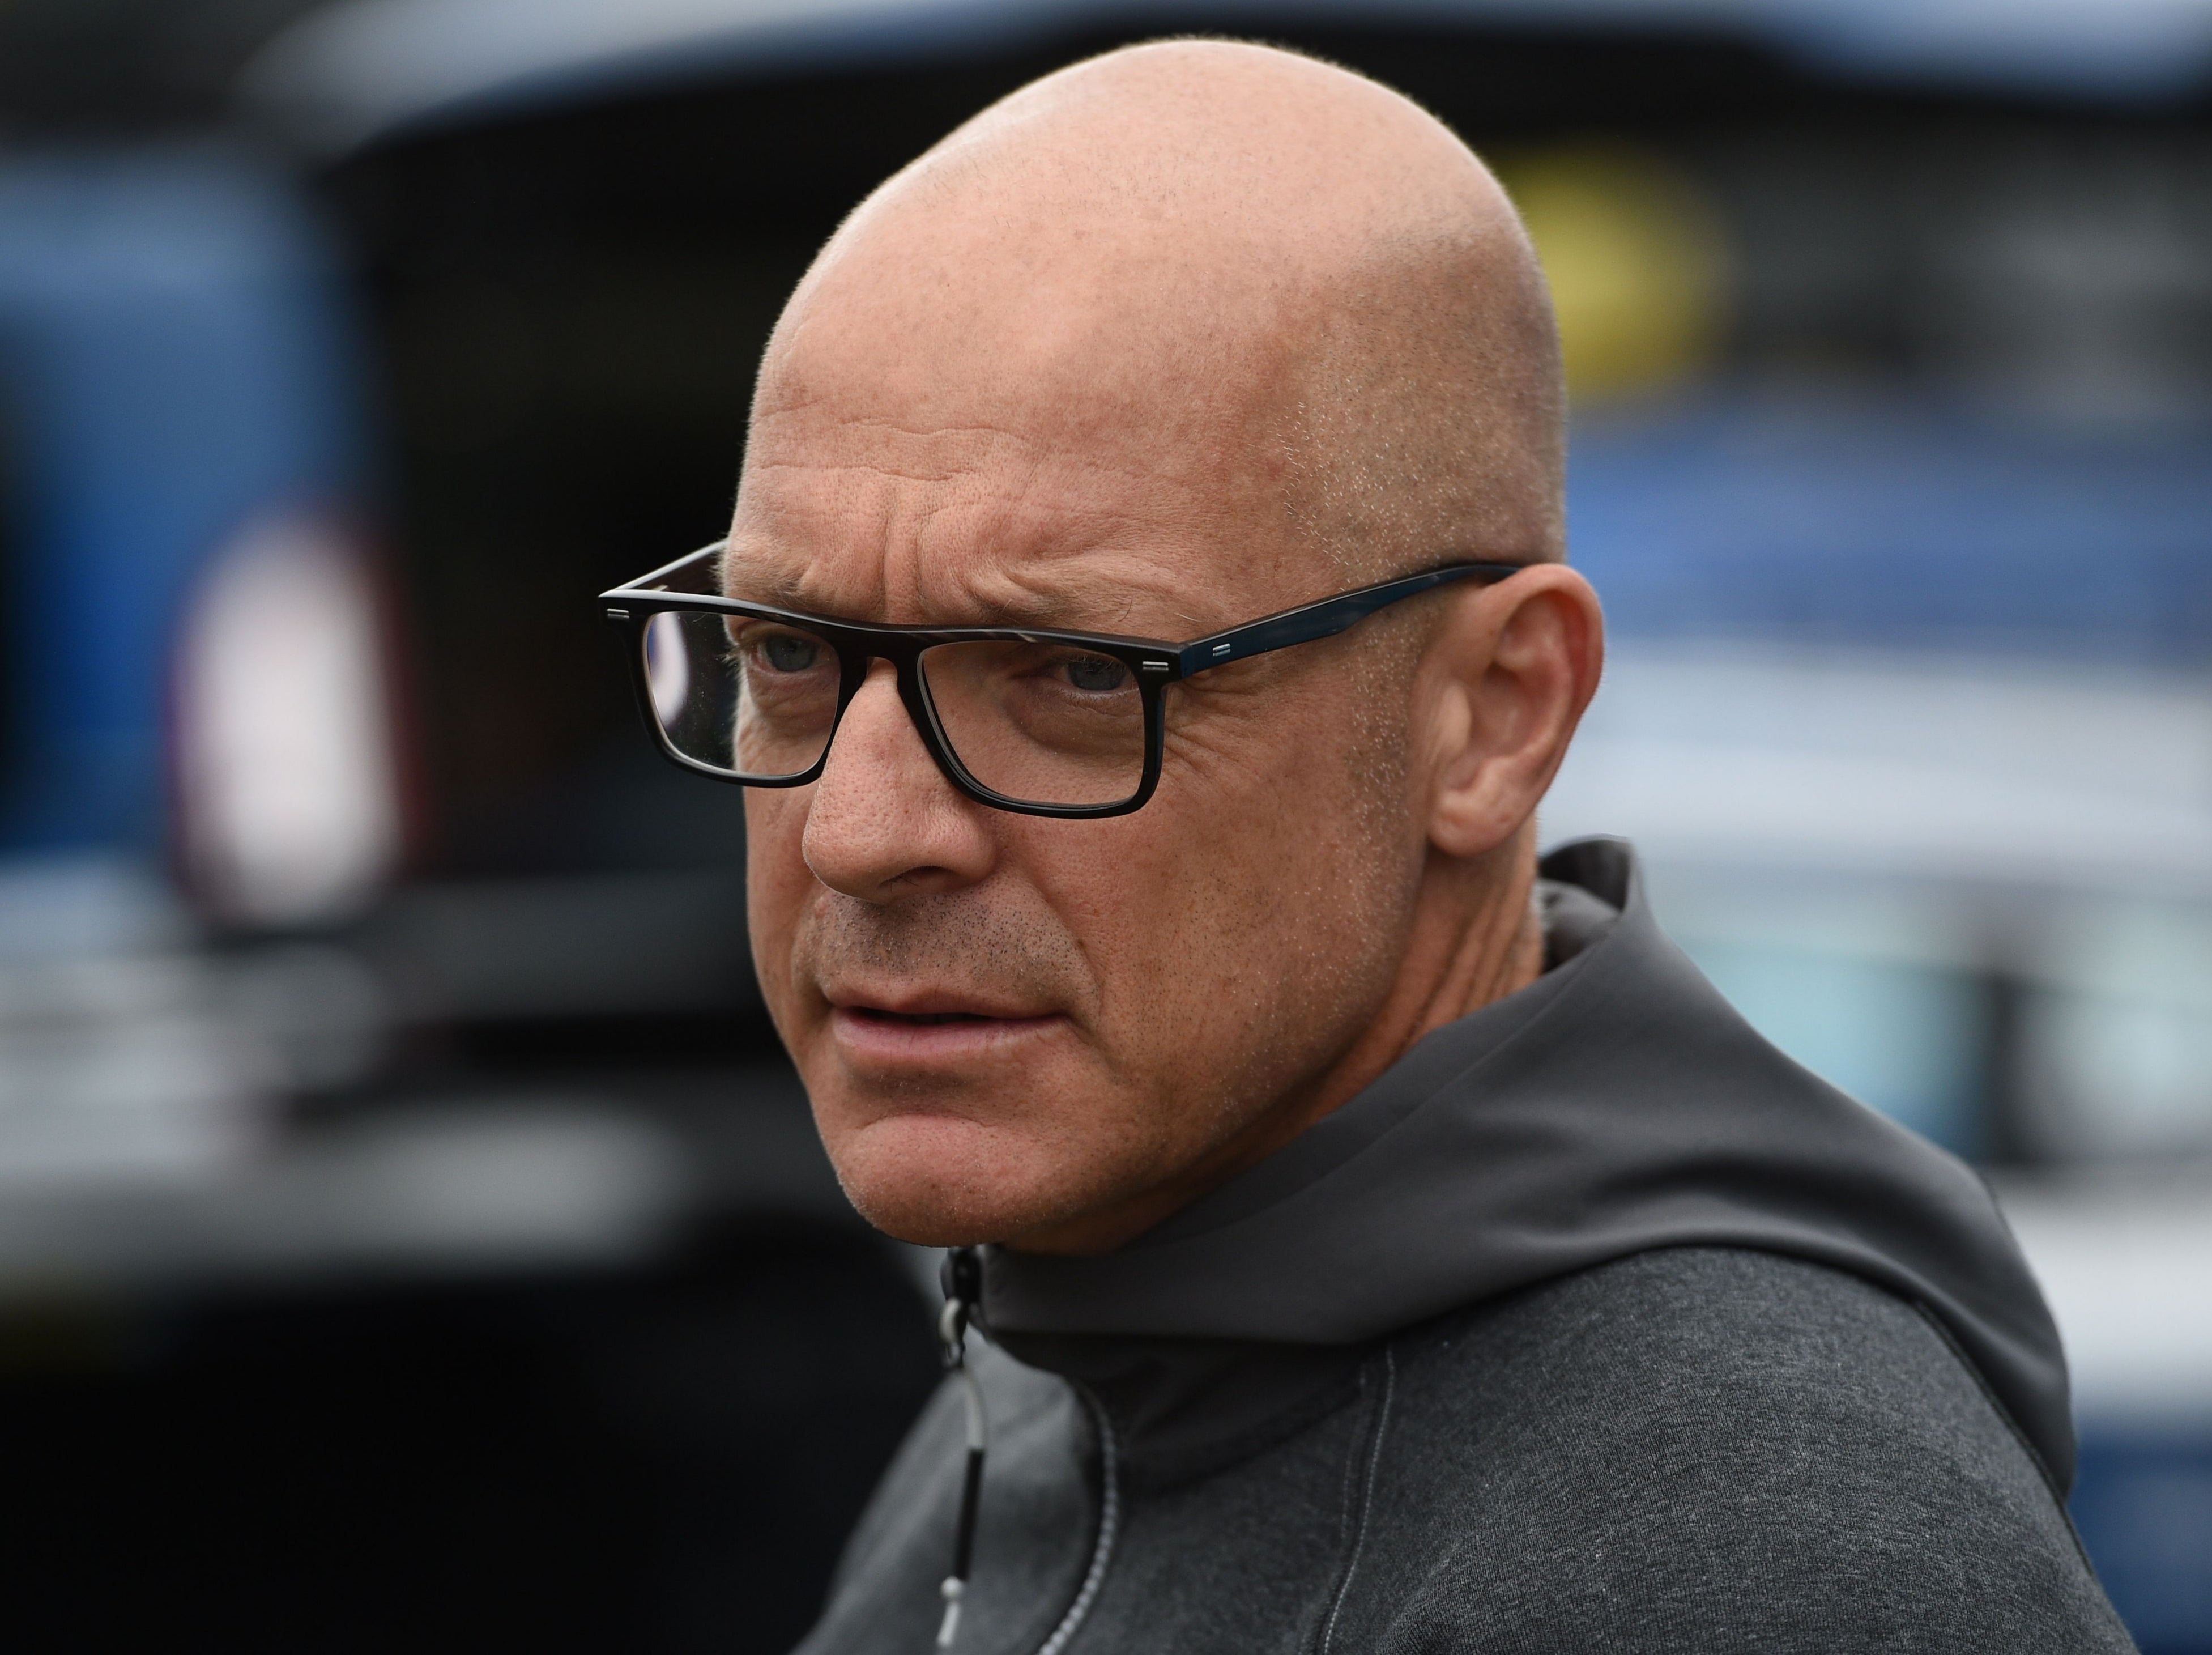 Sir Dave Brailsford, general manager of Team Ineos Grenadiers